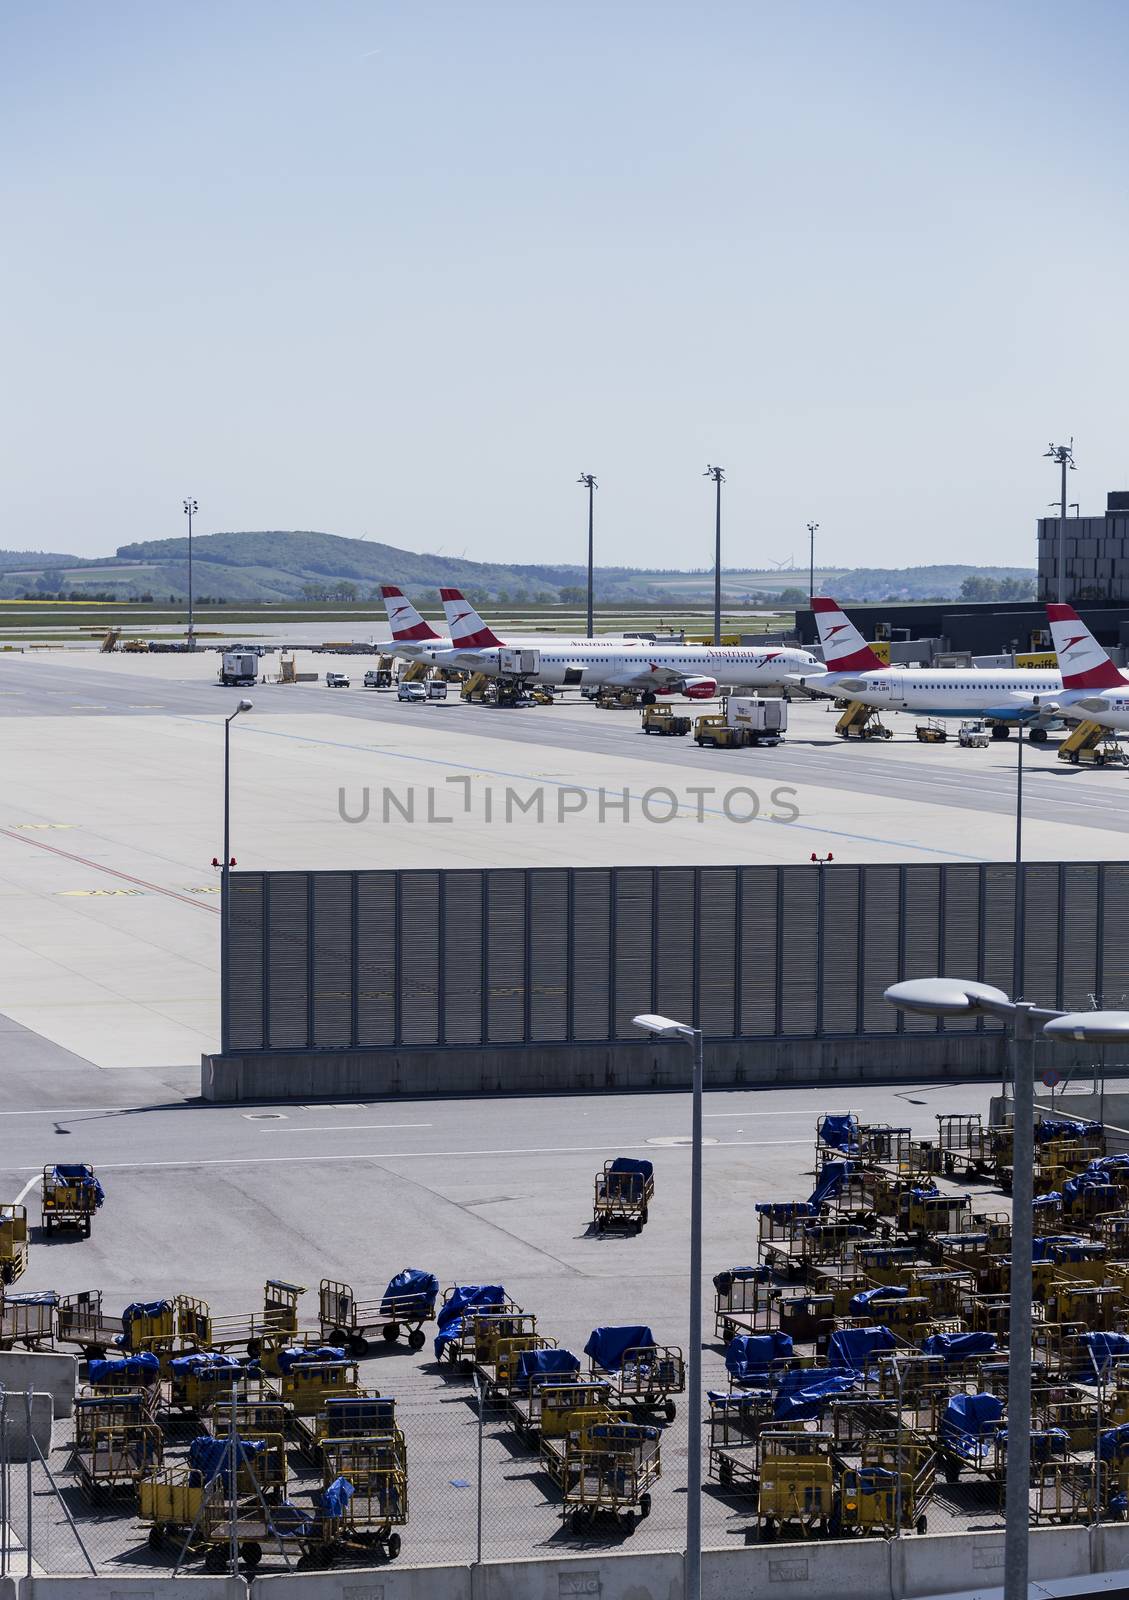 VIENNA, AUSTRIA – APRIL 30th 2016: Austrian Airline planes lined up a busy Saturday at Vienna International Airport.